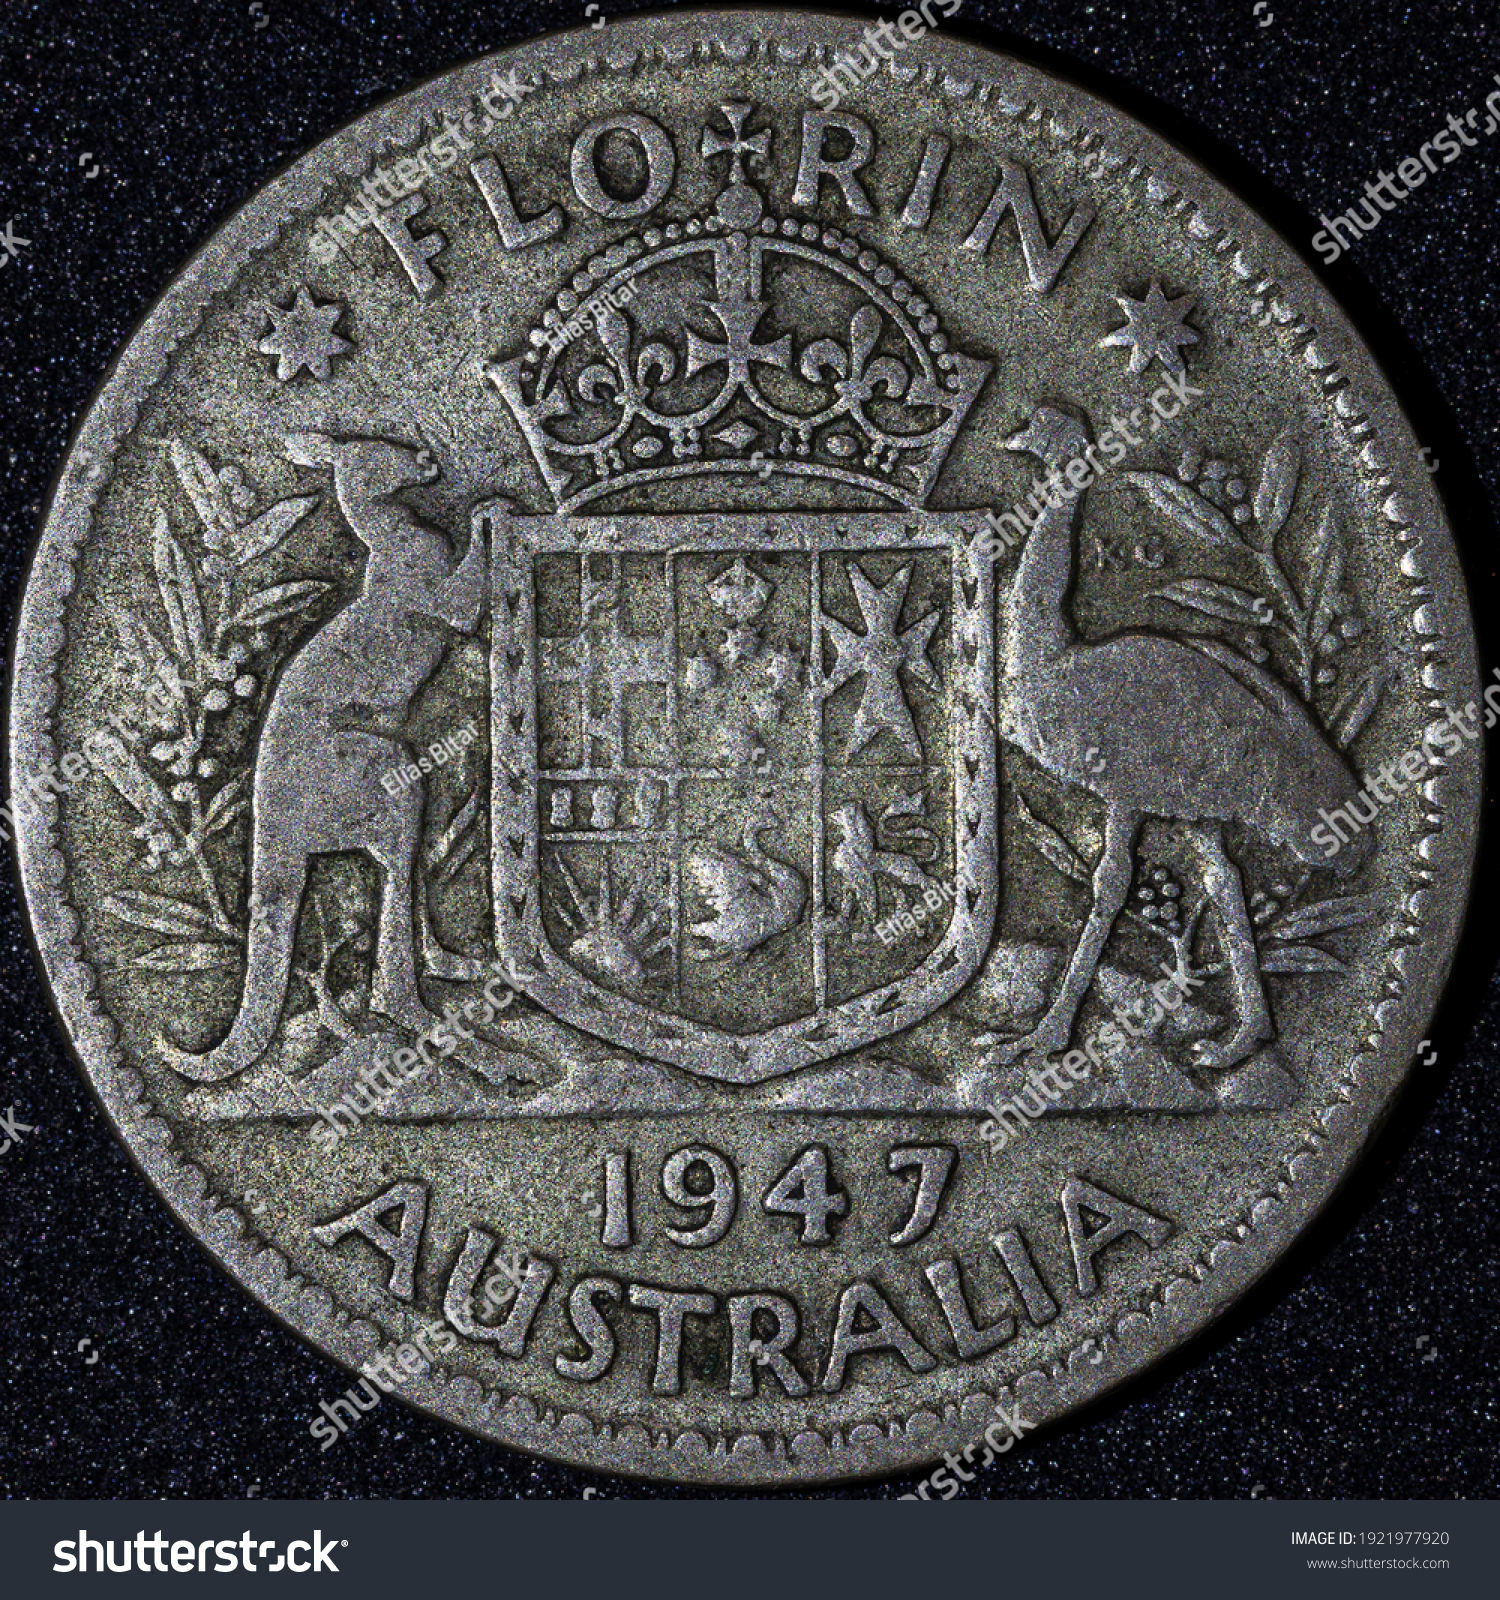 Forkert Tag ud Udtale Back 1947 Australian Florin Silver Coin Stock Photo (Edit Now) 1921977920